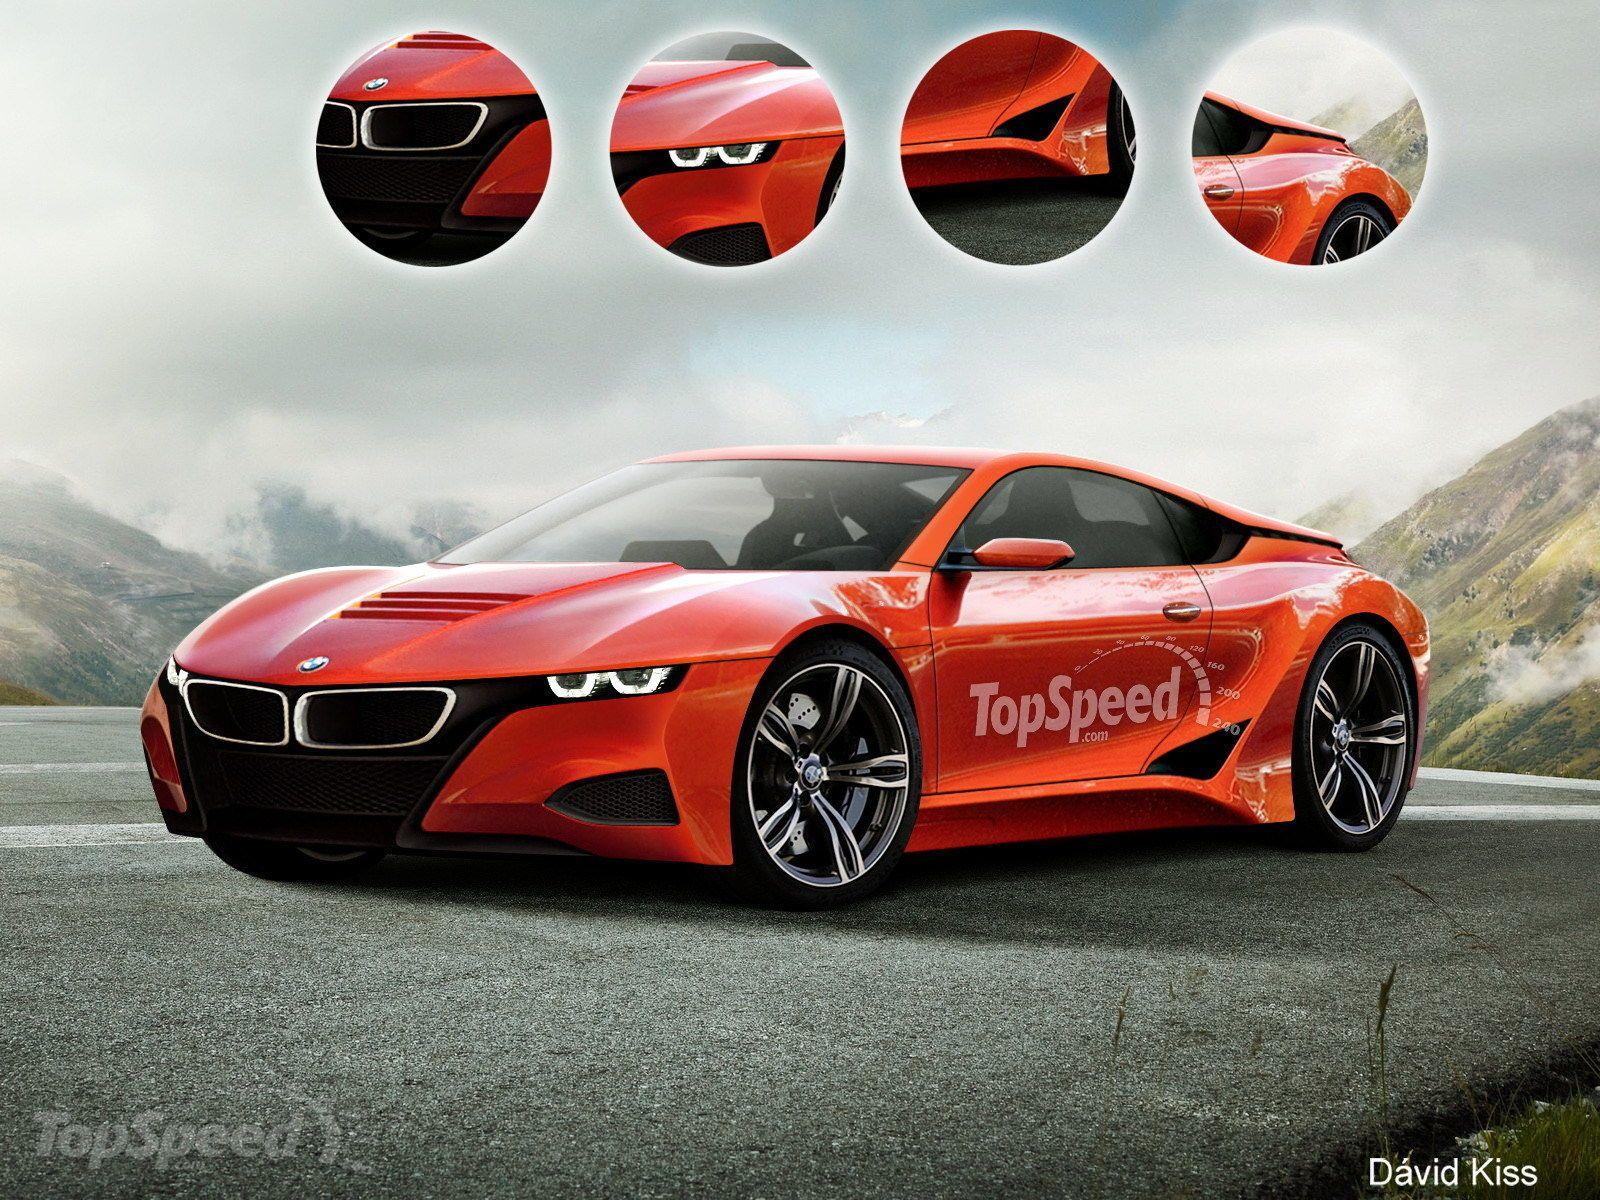 Rumor: BMW M8 Supercar with 630 hp coming in 2018?